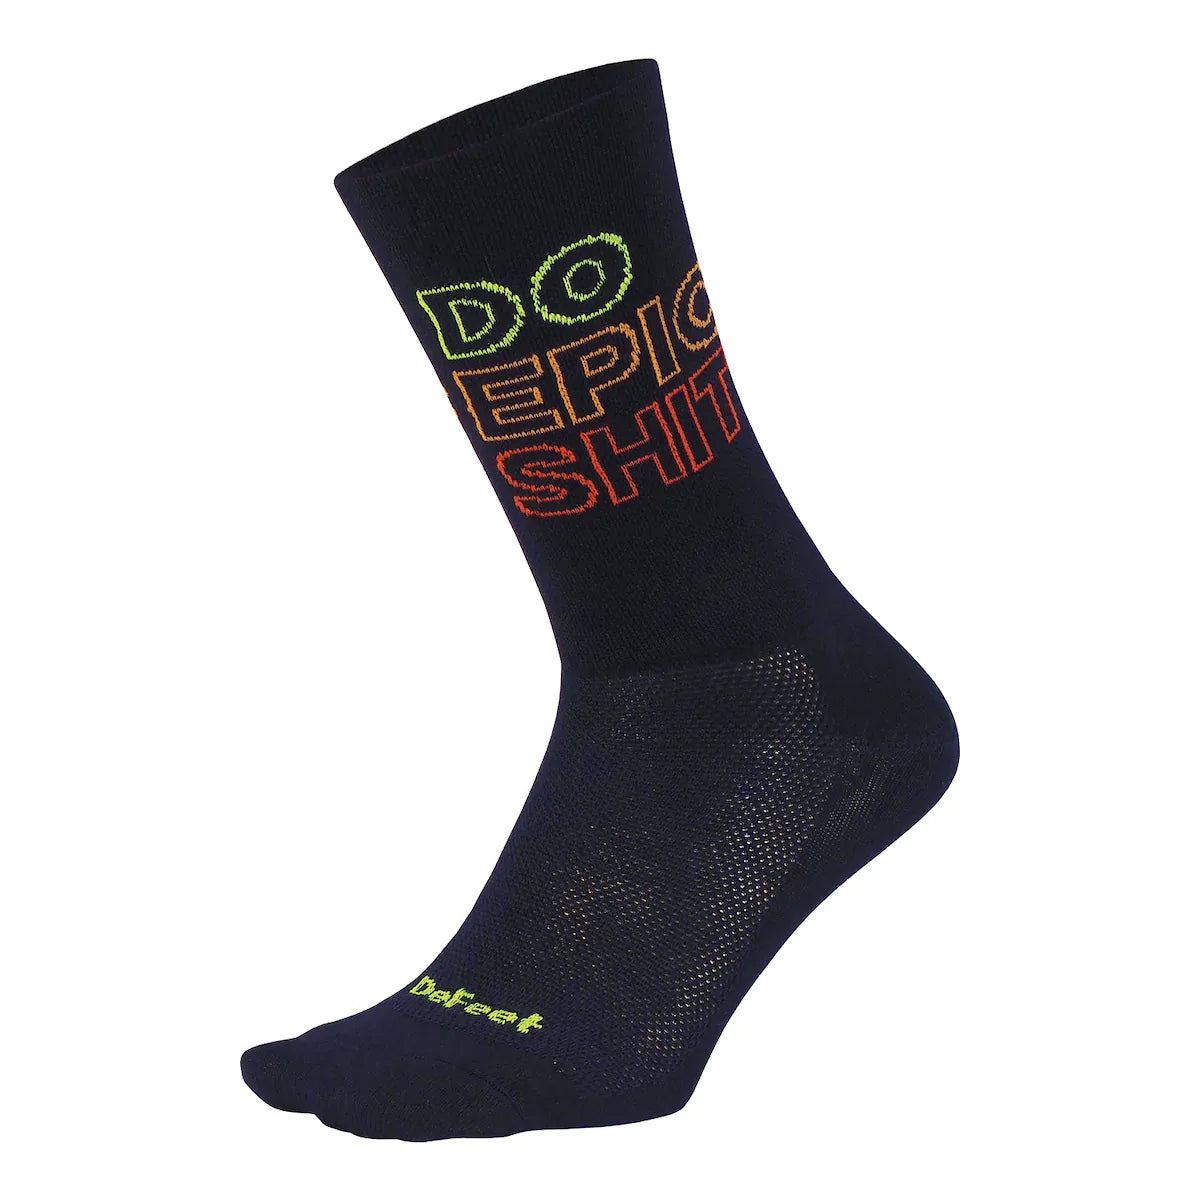 DeFeet Aireator 6” double cuff cycling sock in black with “Do Epic Shit” on cuff in neon yellow, pumpkin orange, and poinciana red.